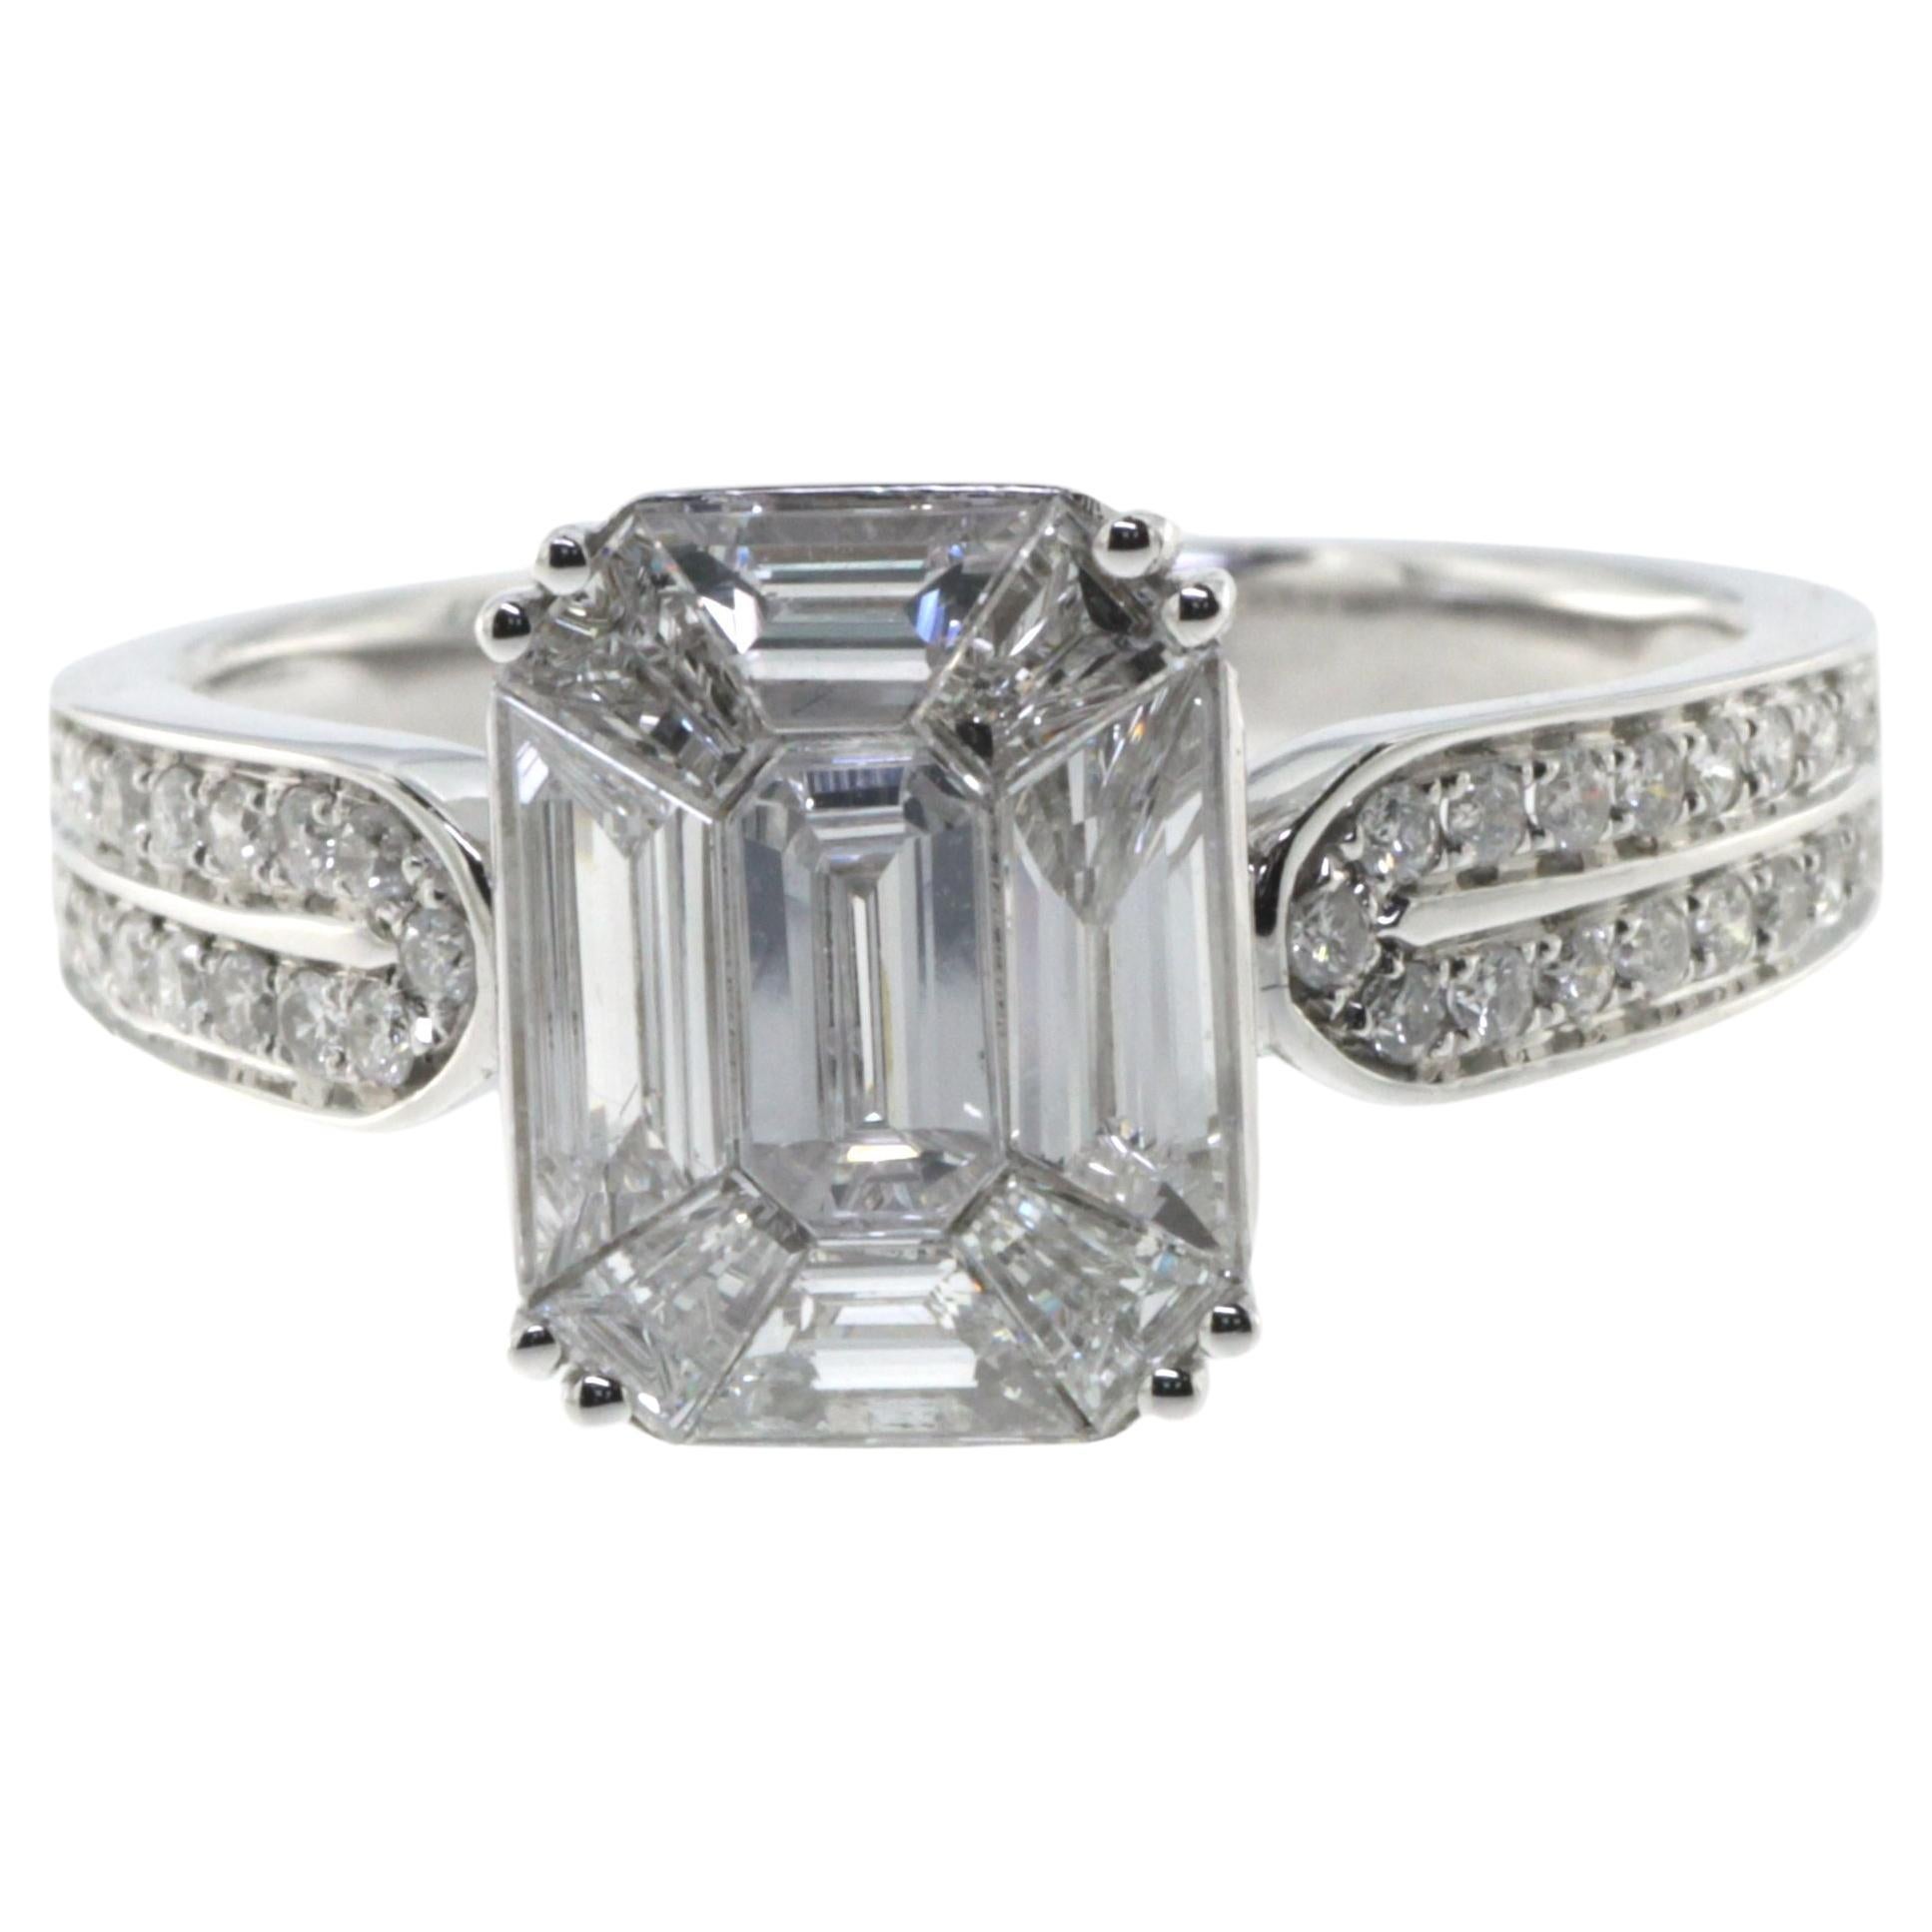 1.19 Carat Illusion Setting Diamonds Ring in 18K White Gold For Sale